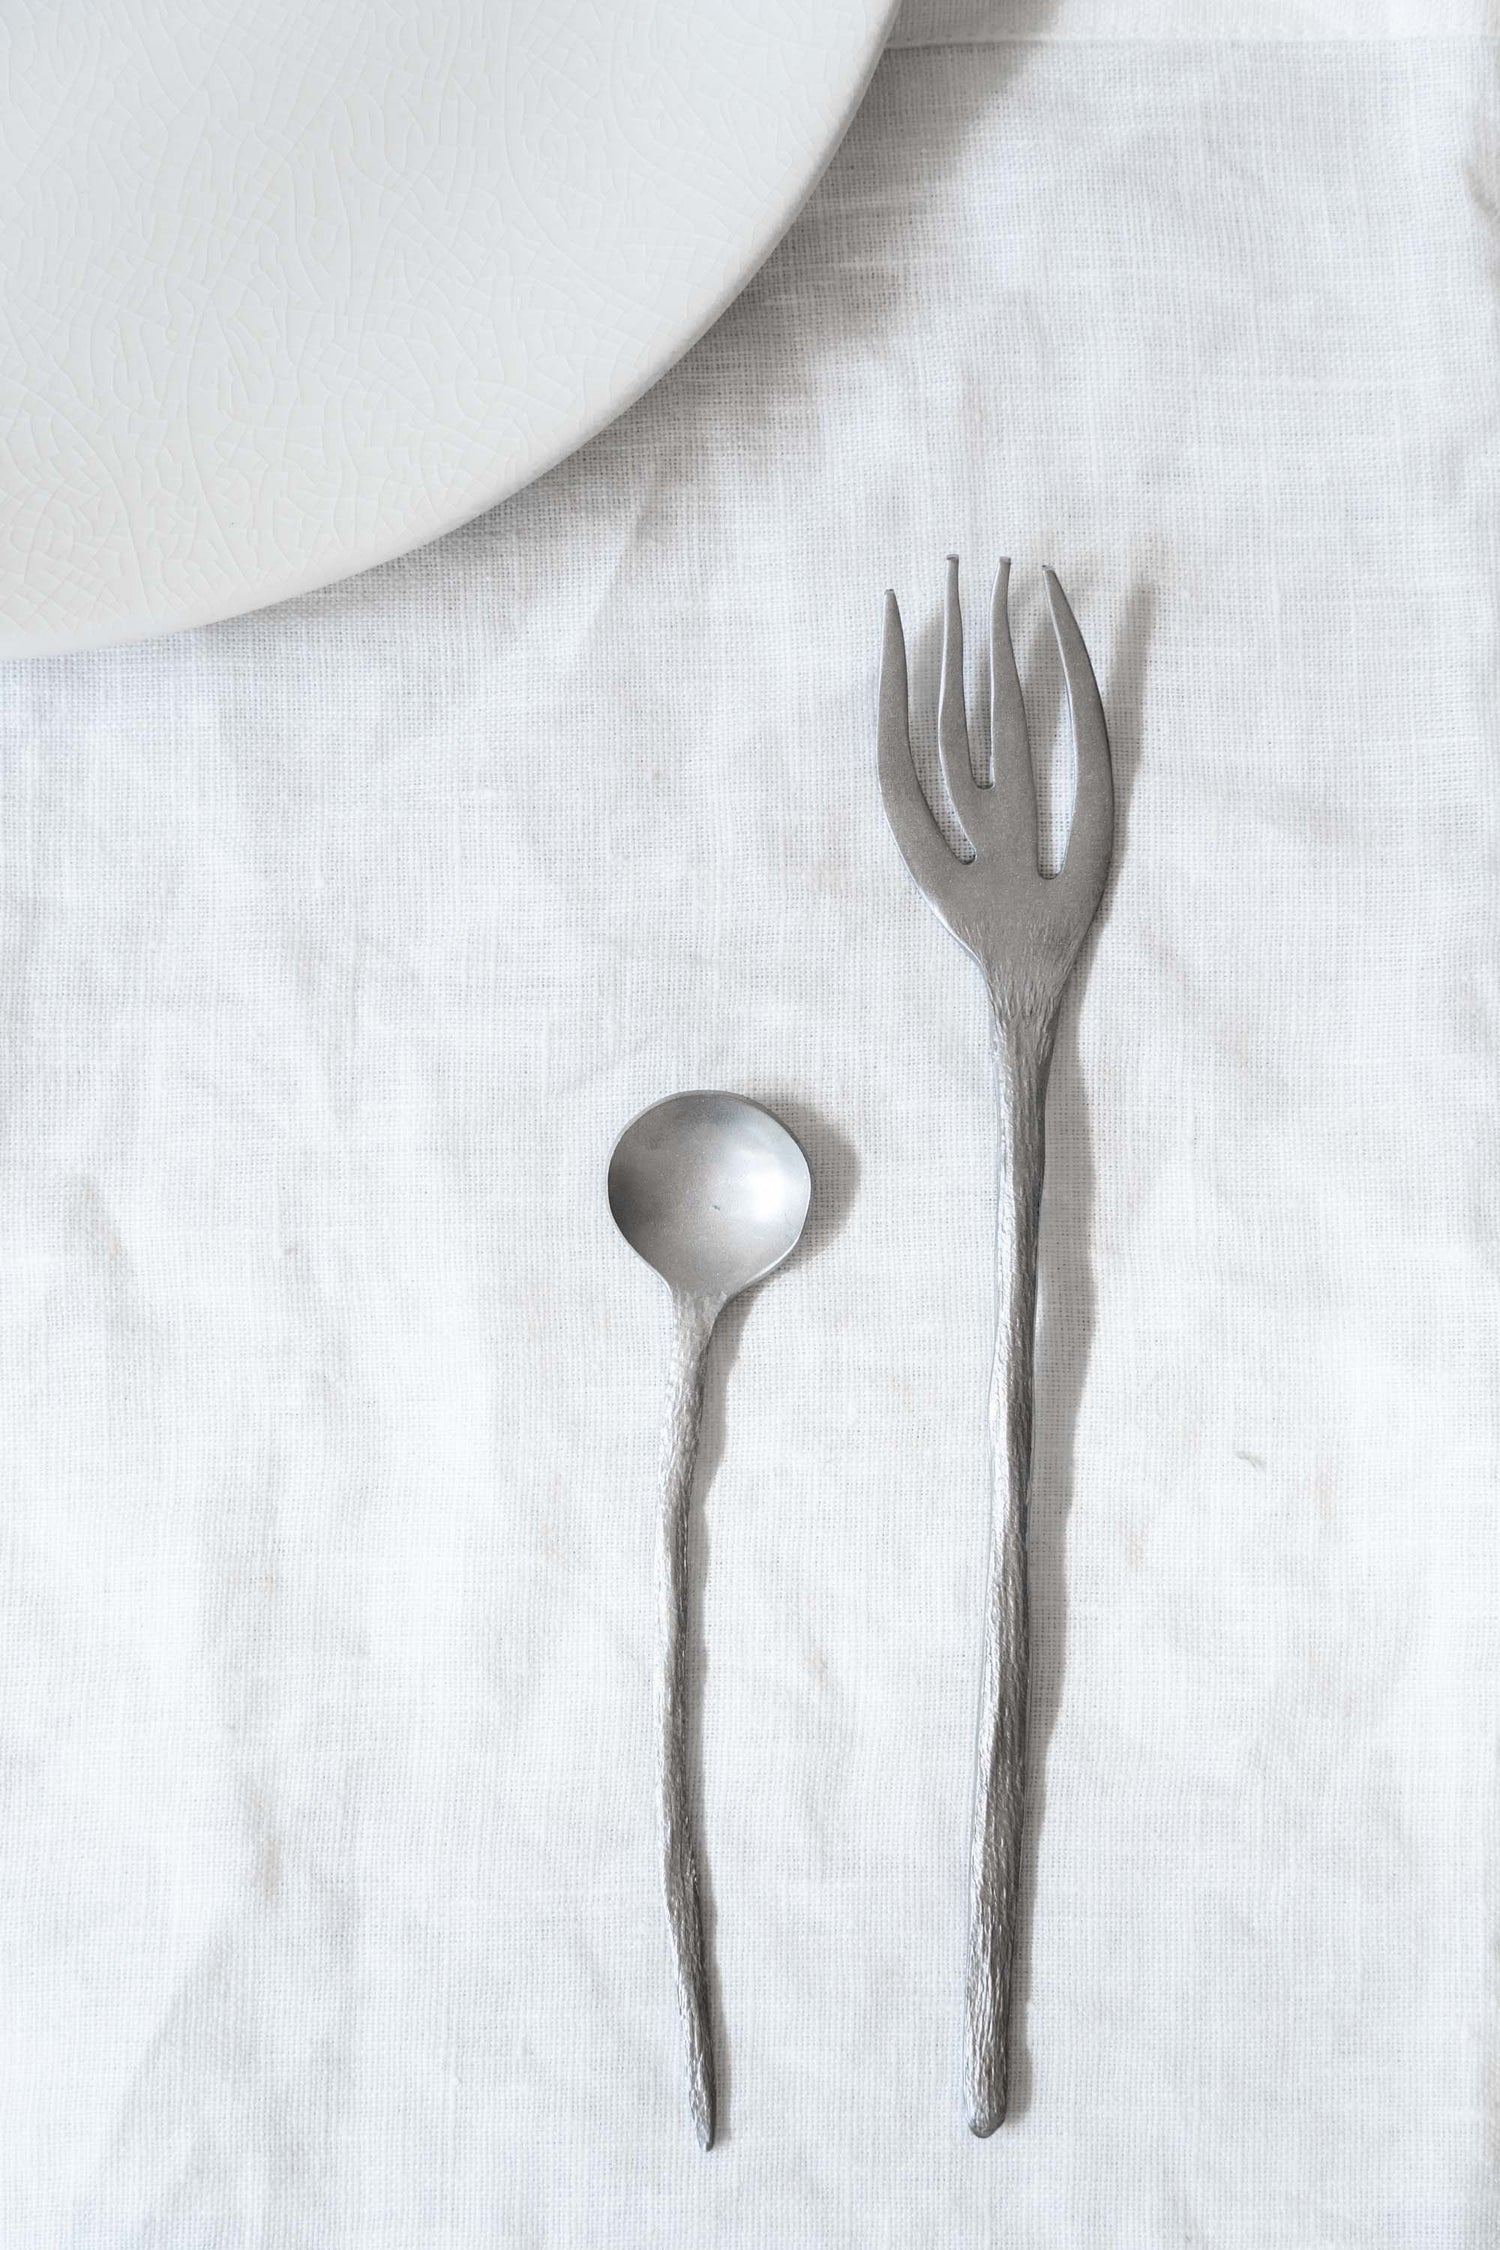 Table Fork from the Flora Vulgaris Cutlery Collection by Serax.